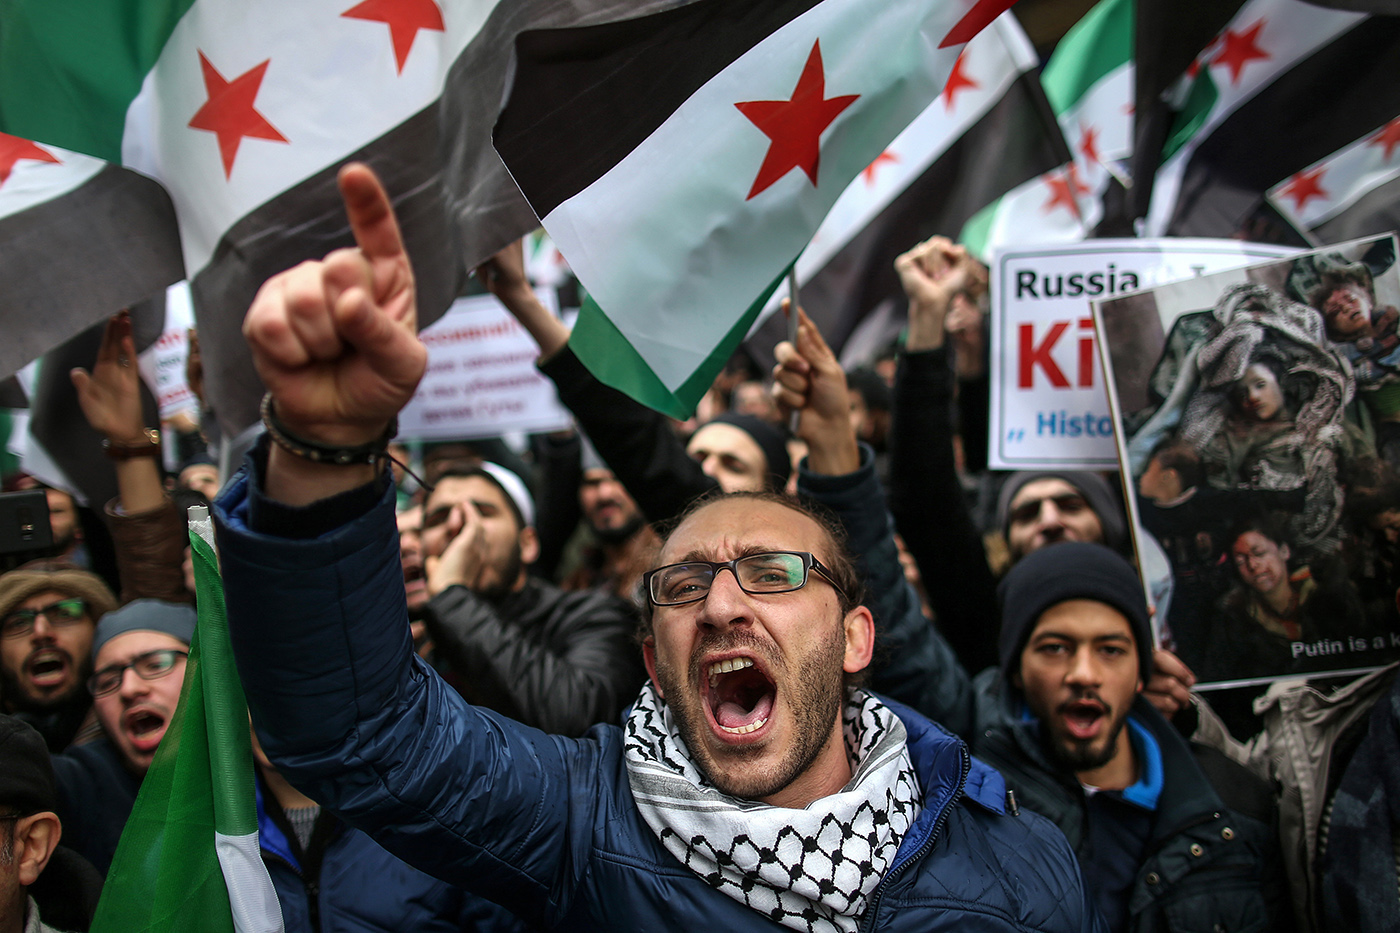  Syrian refugees hold placards and the Syrian National Coalition flag while shouting anti-Russia slogans for the country